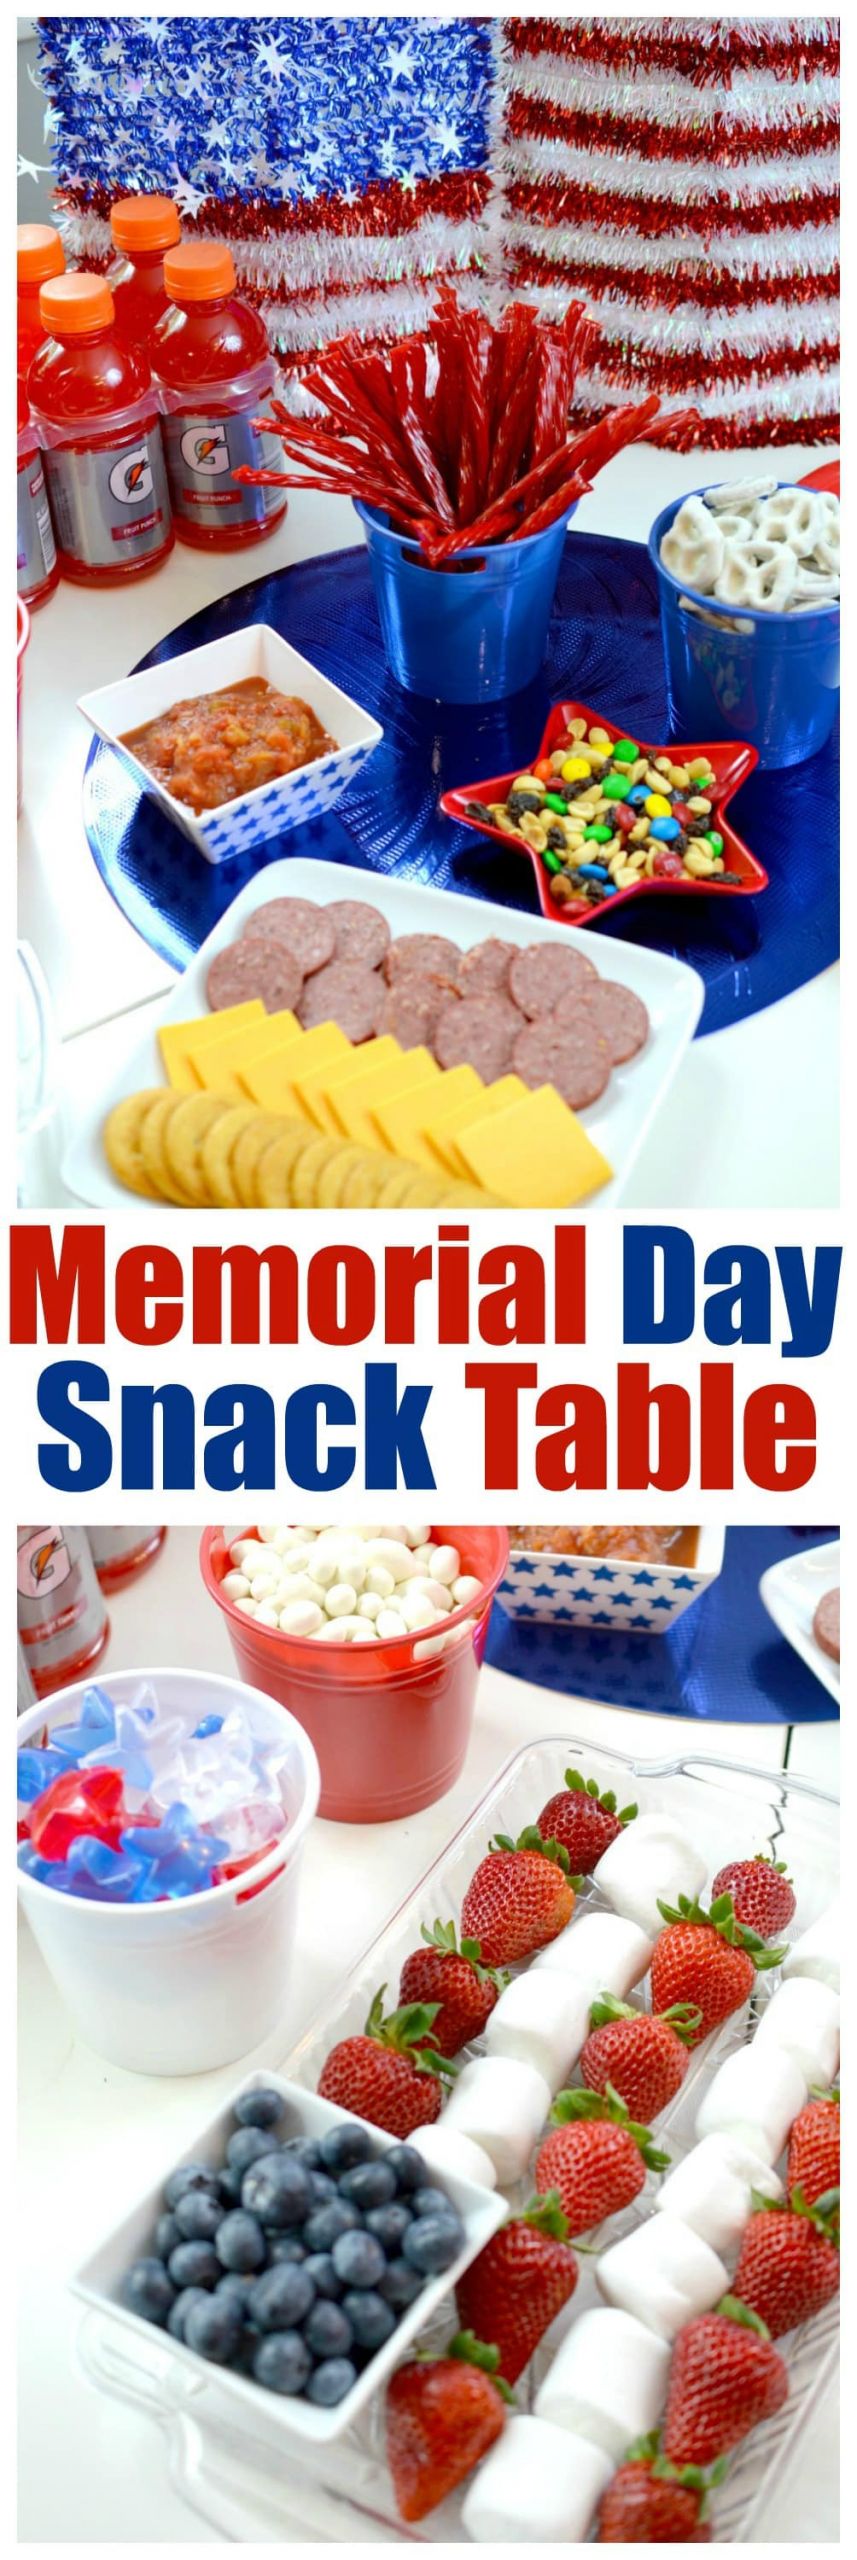 Memorial Day Food Ideas
 Memorial Day Party Ideas How to Create a Memorial Day